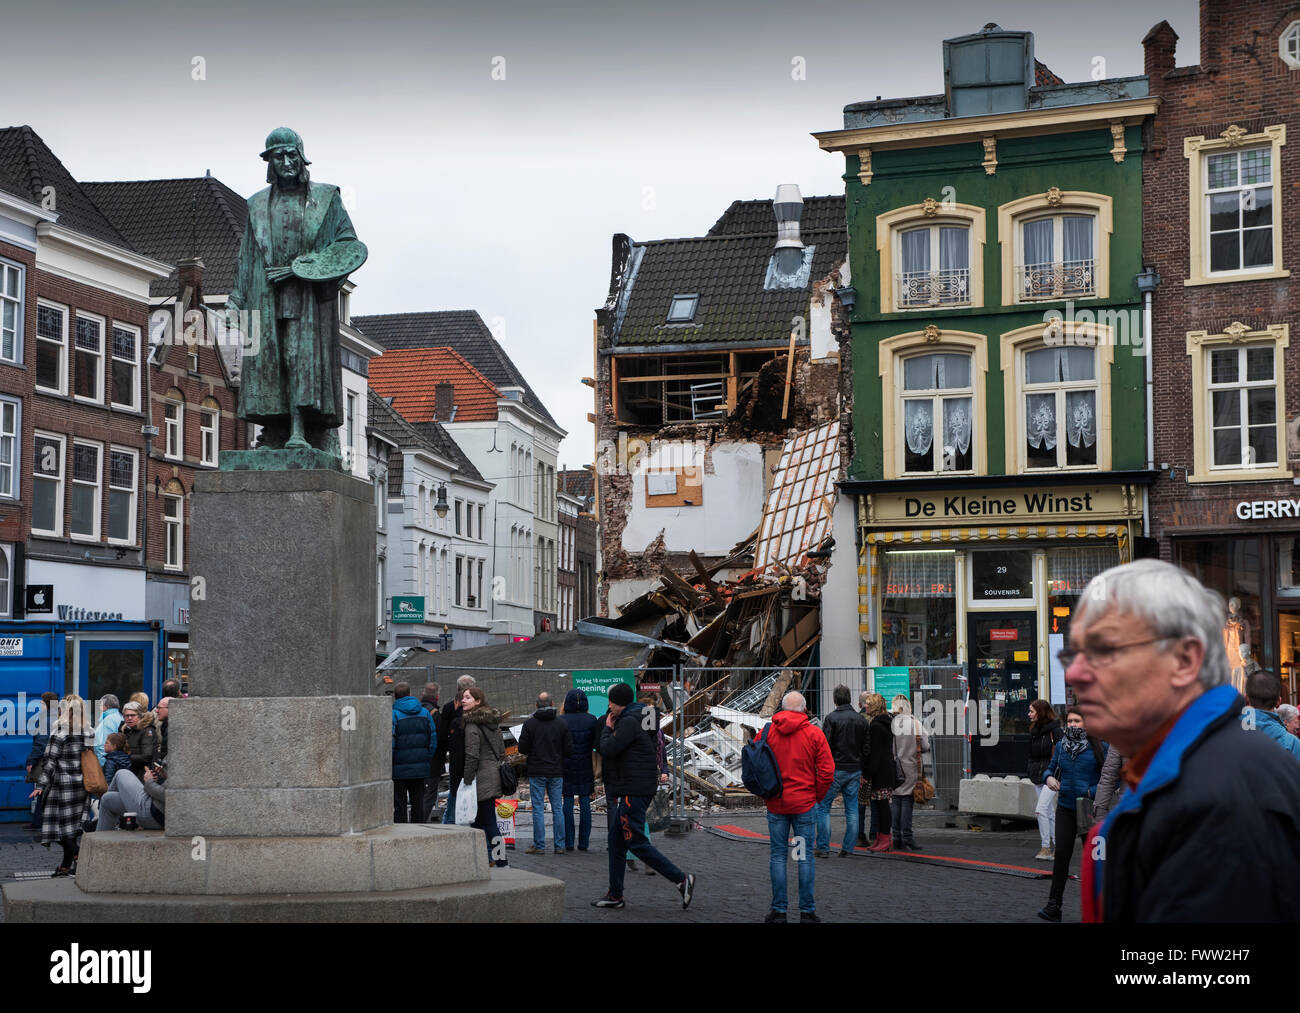 Den Bosch - 's-Hertogenbosch, North Brabant, Netherlands. March 2016 Den  Bosch celebrates 500th anniversary of death of Bosch. The collapsed house  next to the house Bosch lived in. Statue of Hieronymus Bosch